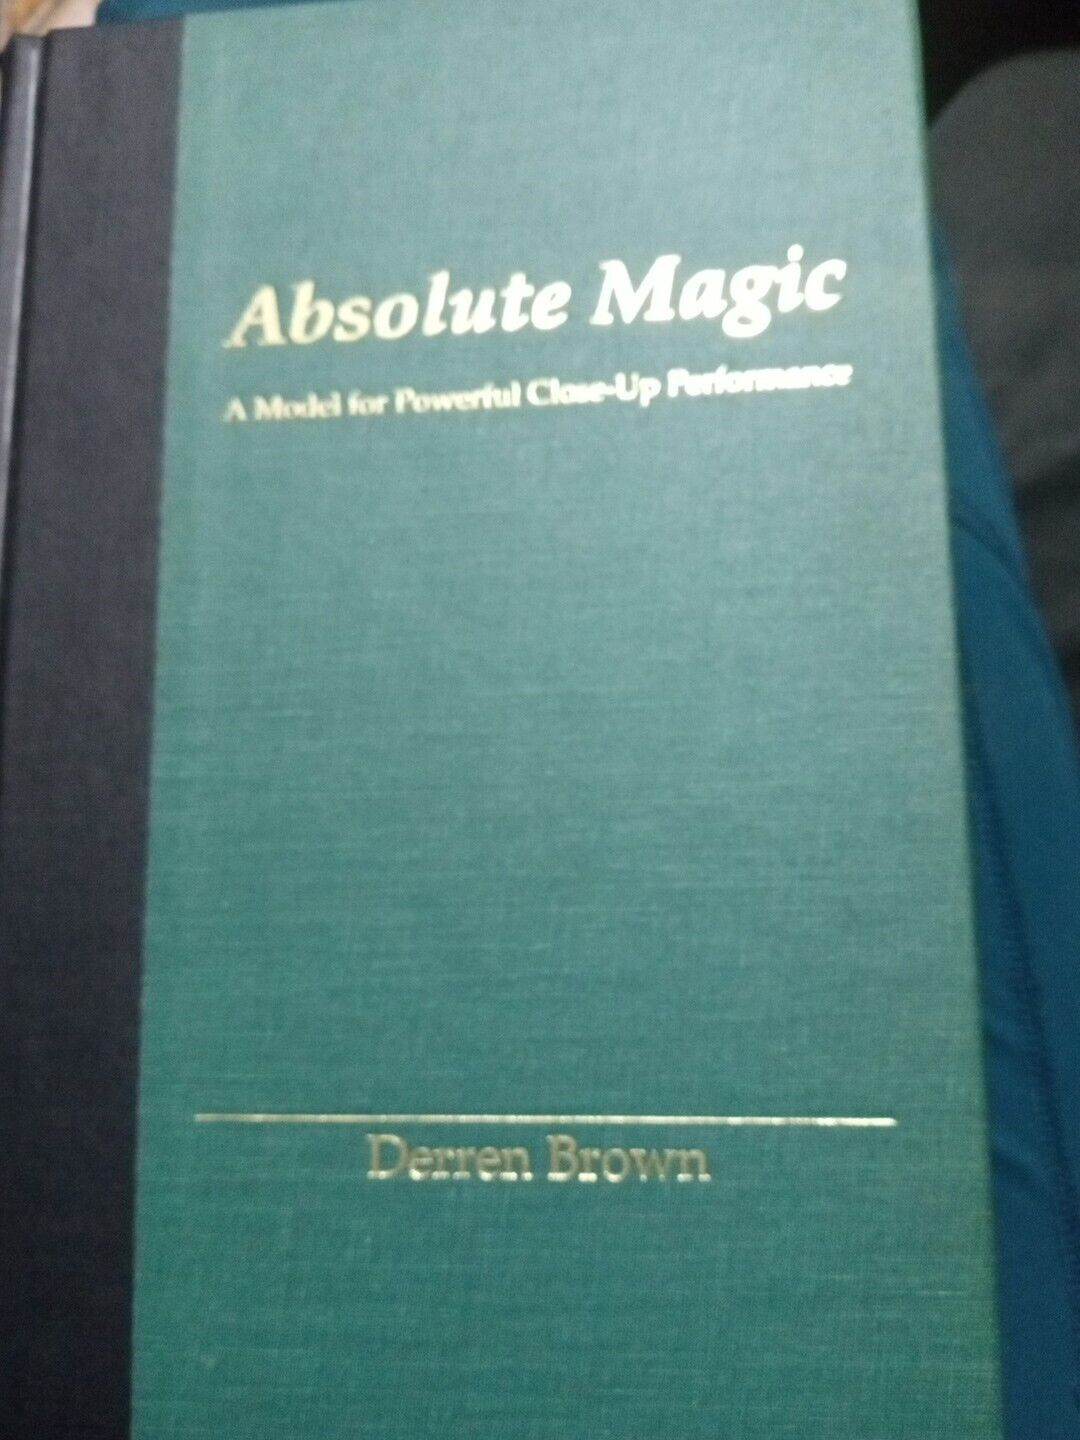 RARE—“ABSOLUTE MAGIC”- A Model for Close-Up Performance” by Derren Brown